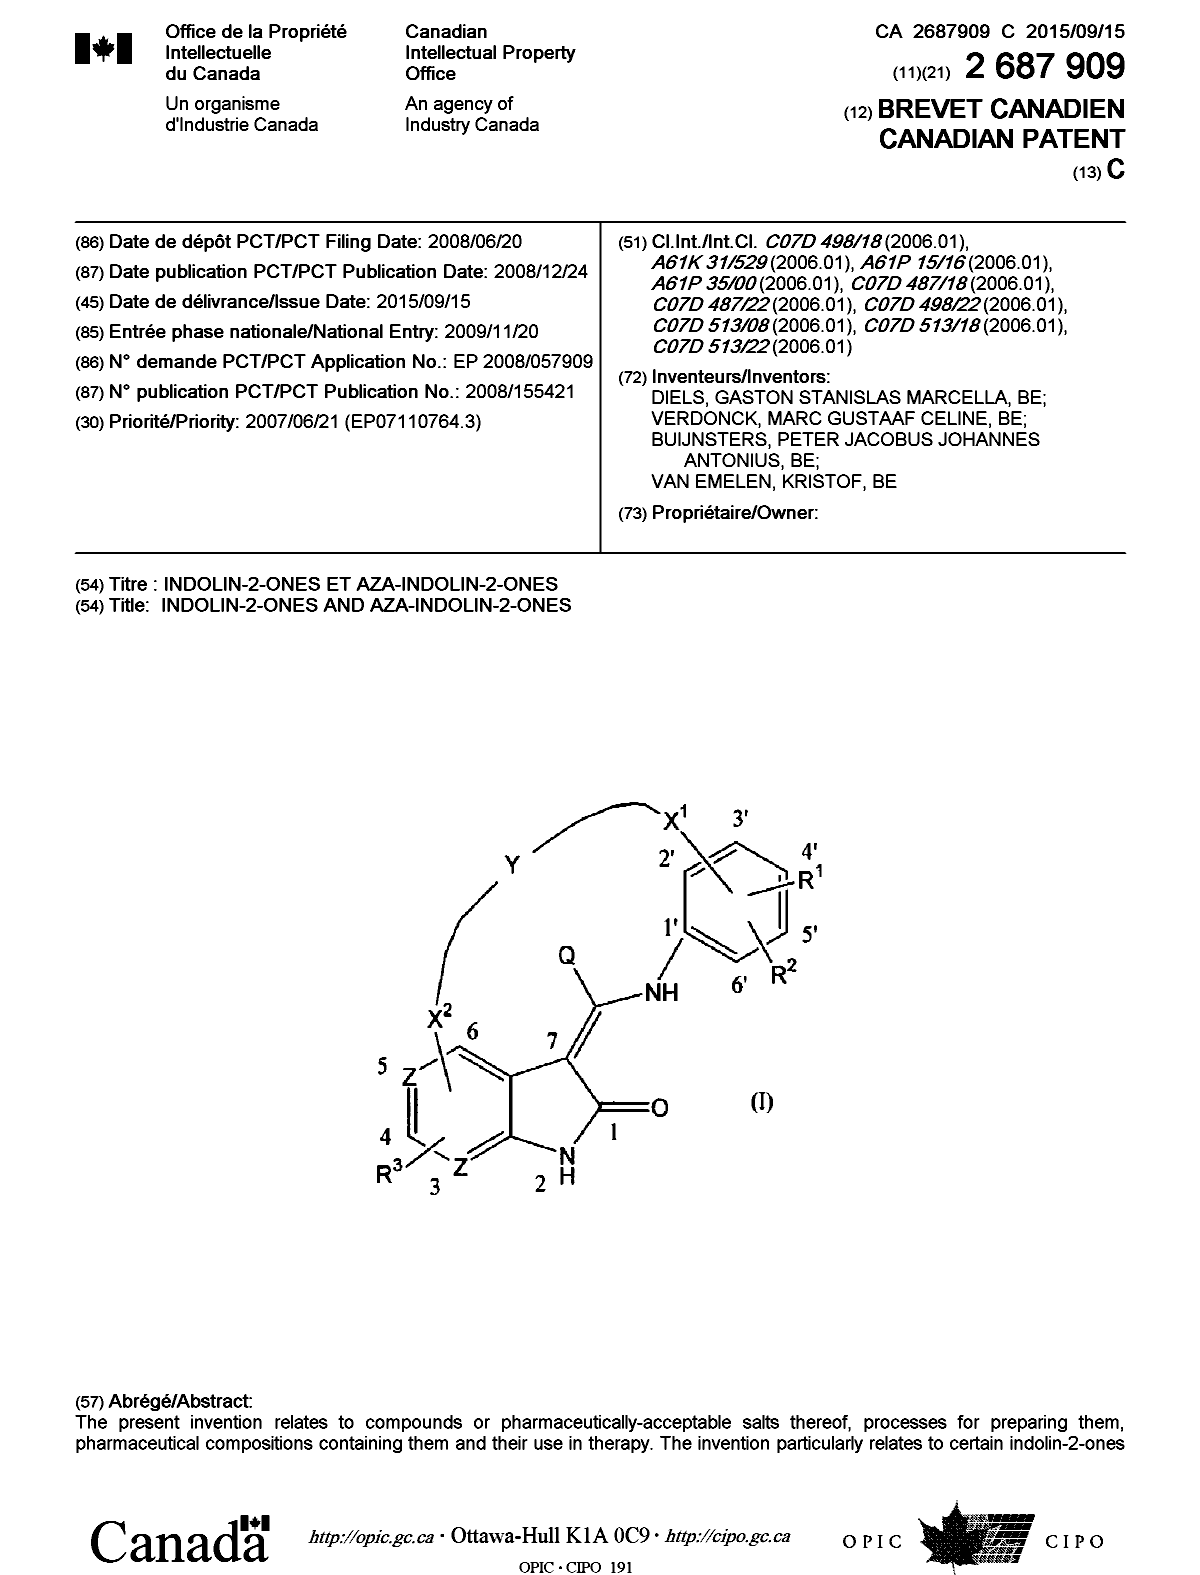 Canadian Patent Document 2687909. Cover Page 20150818. Image 1 of 2